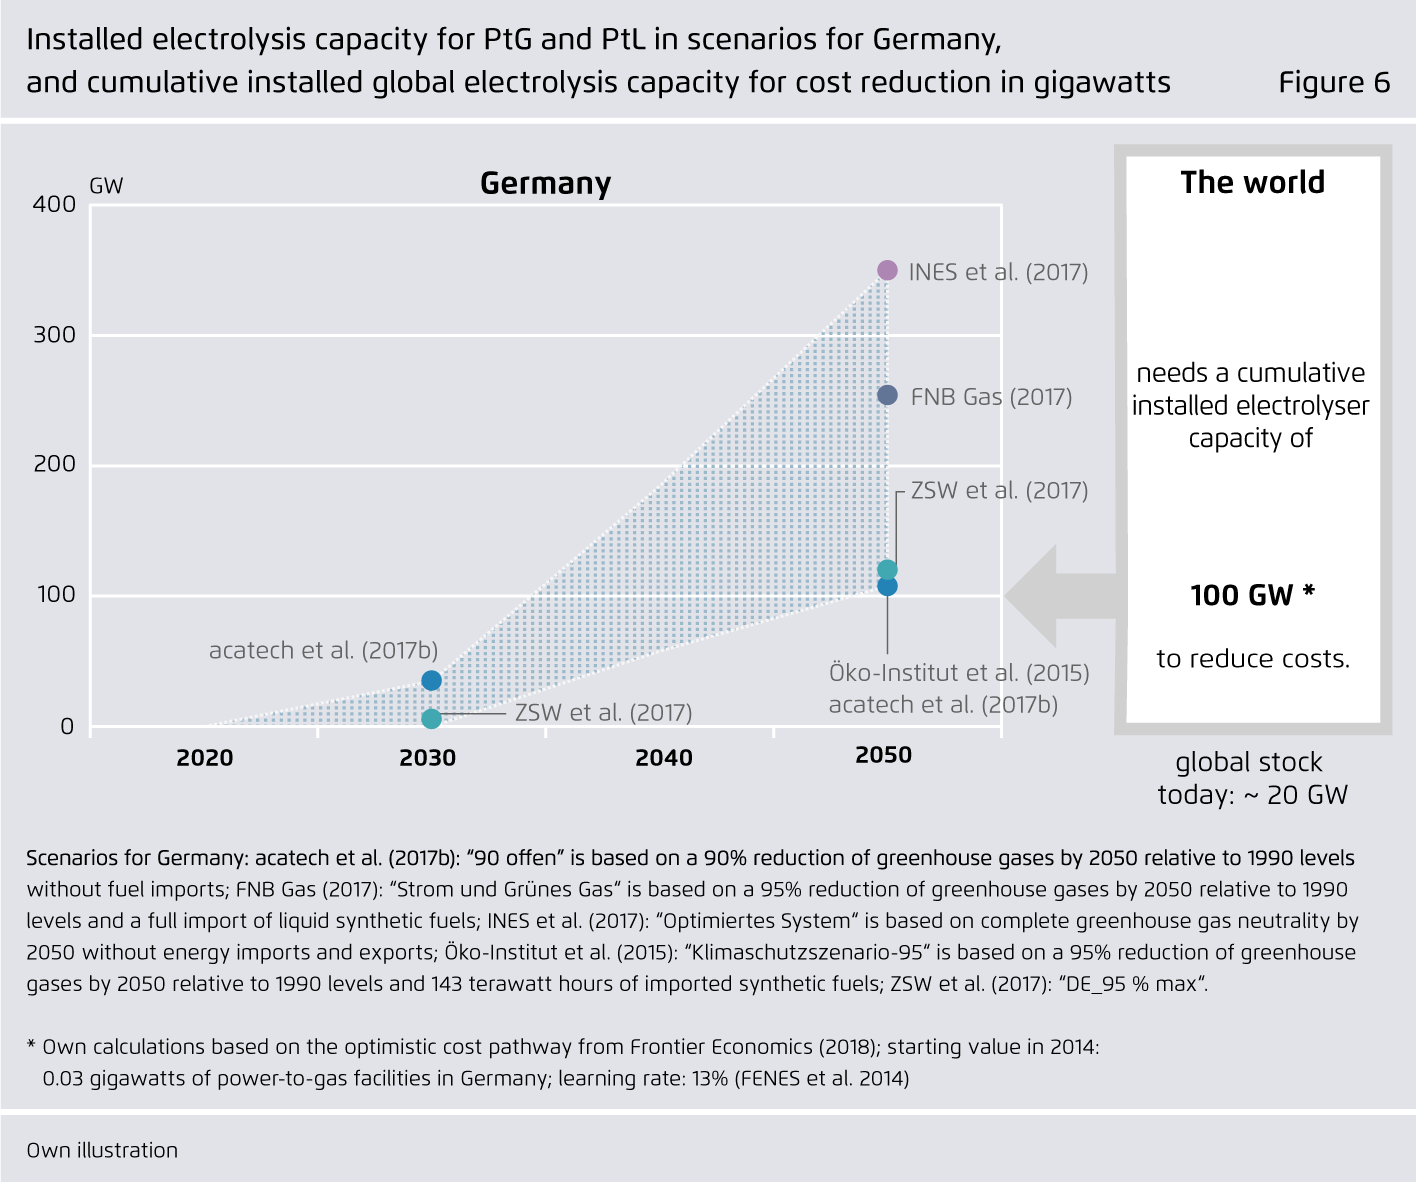 Preview for Installed electrolysis capacity for PtG and PtL in scenarios for Germany, and cumulative installed global electrolysis capacity for cost reduction in gigawatts